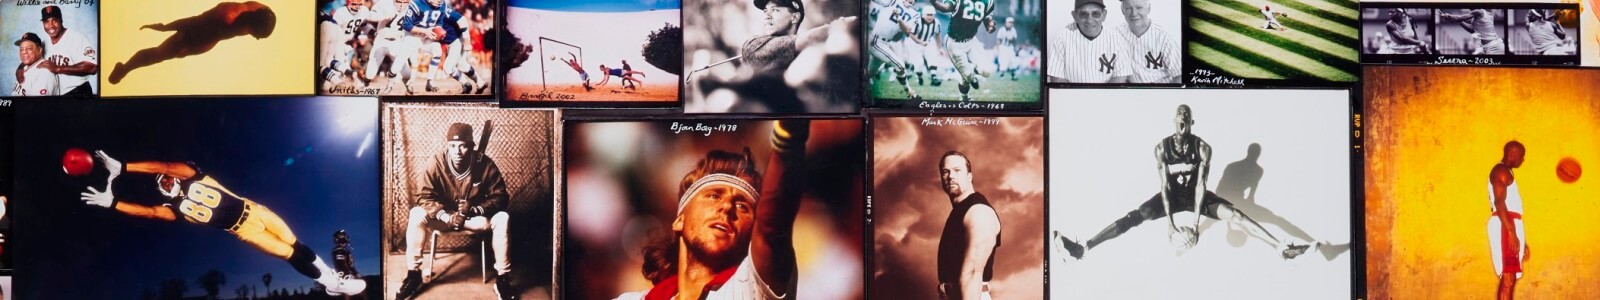 The Athlete: Photographs by Walter Iooss, Jr.